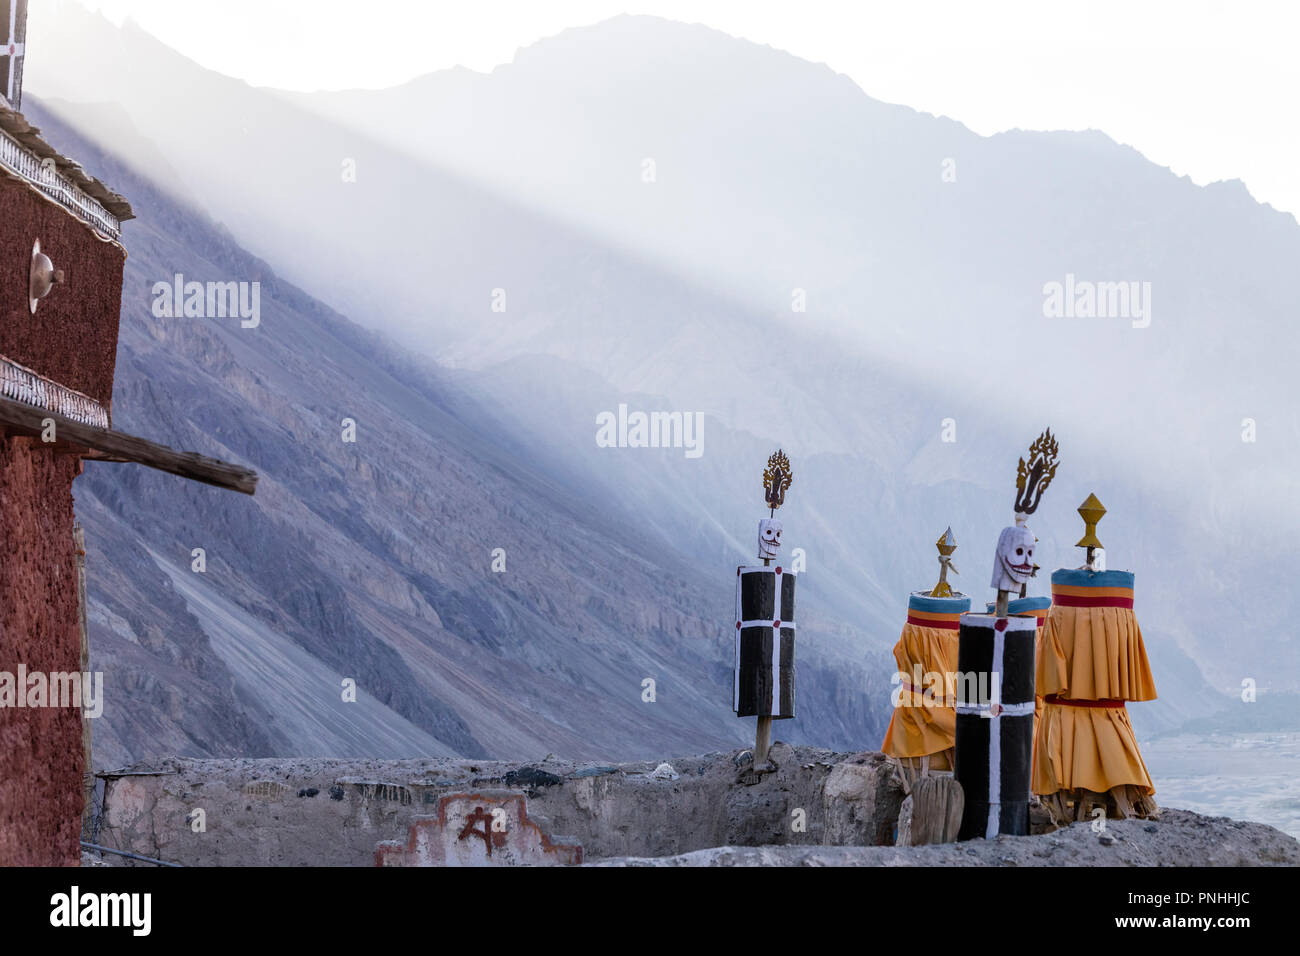 Masks and prayer wheels at the top of the Diksit monastery in the Nubra valley region of India Stock Photo